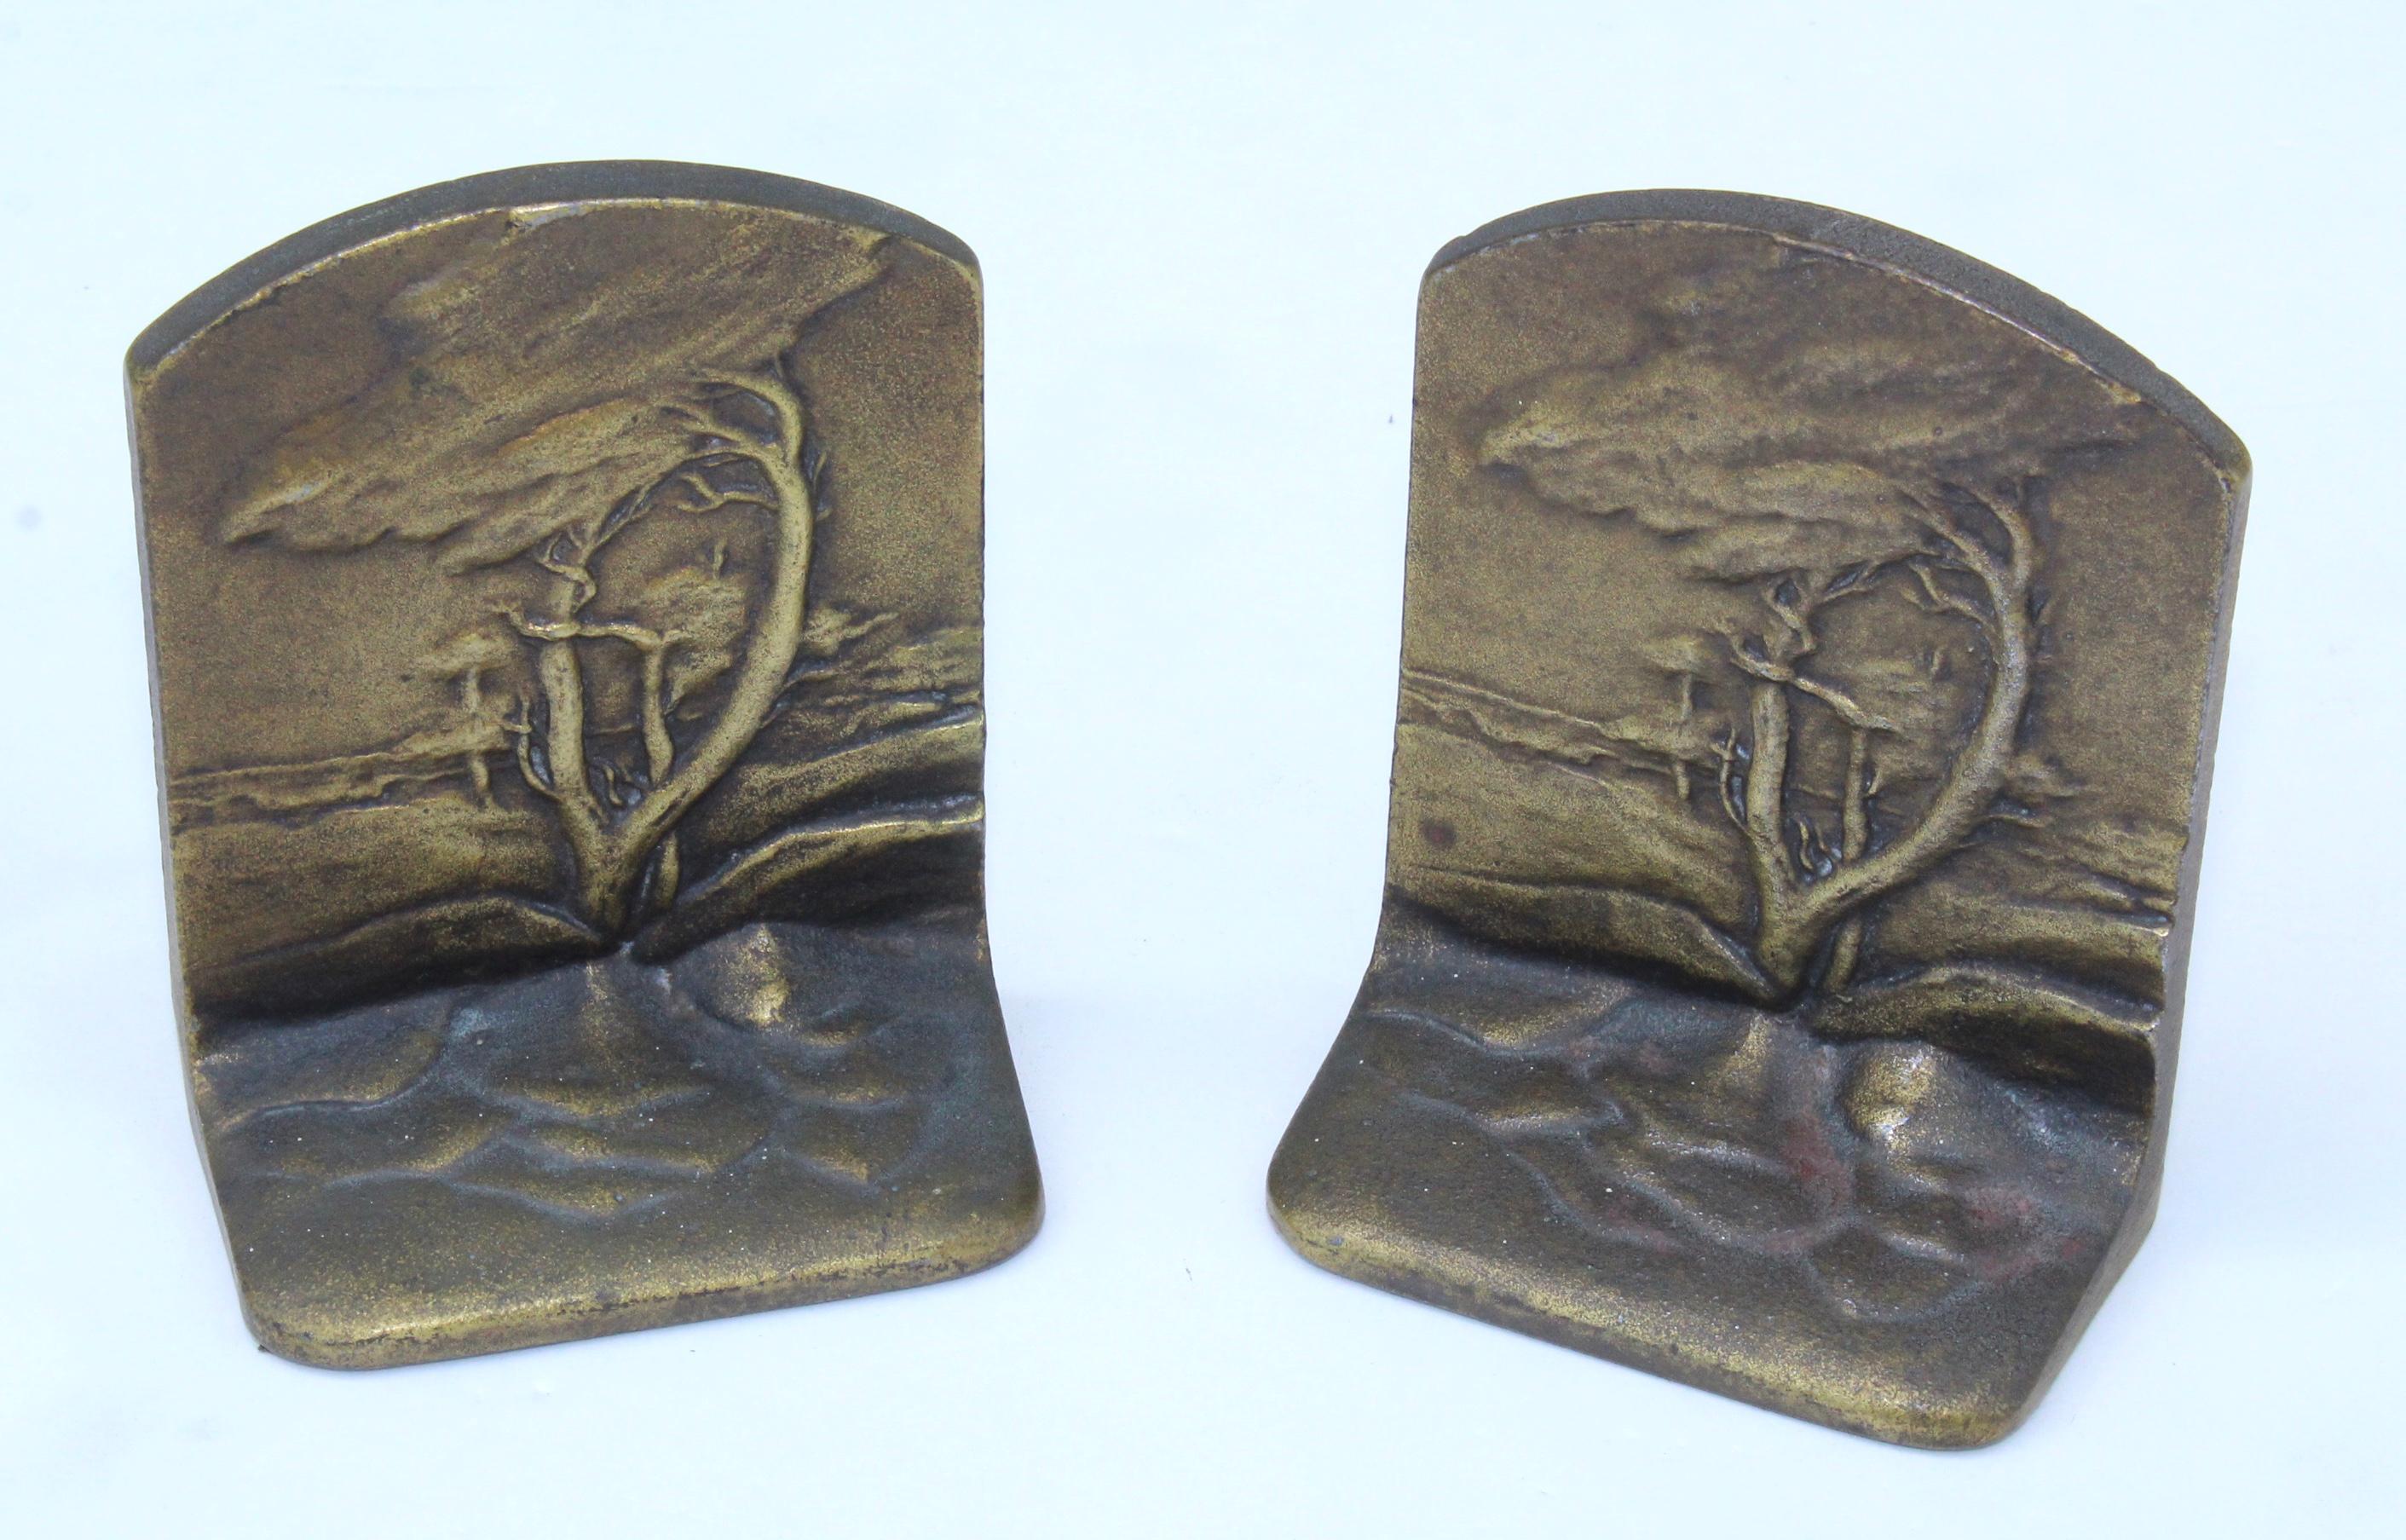 1940s cast iron with bronze finish bookends by Bradley & Hubbard.